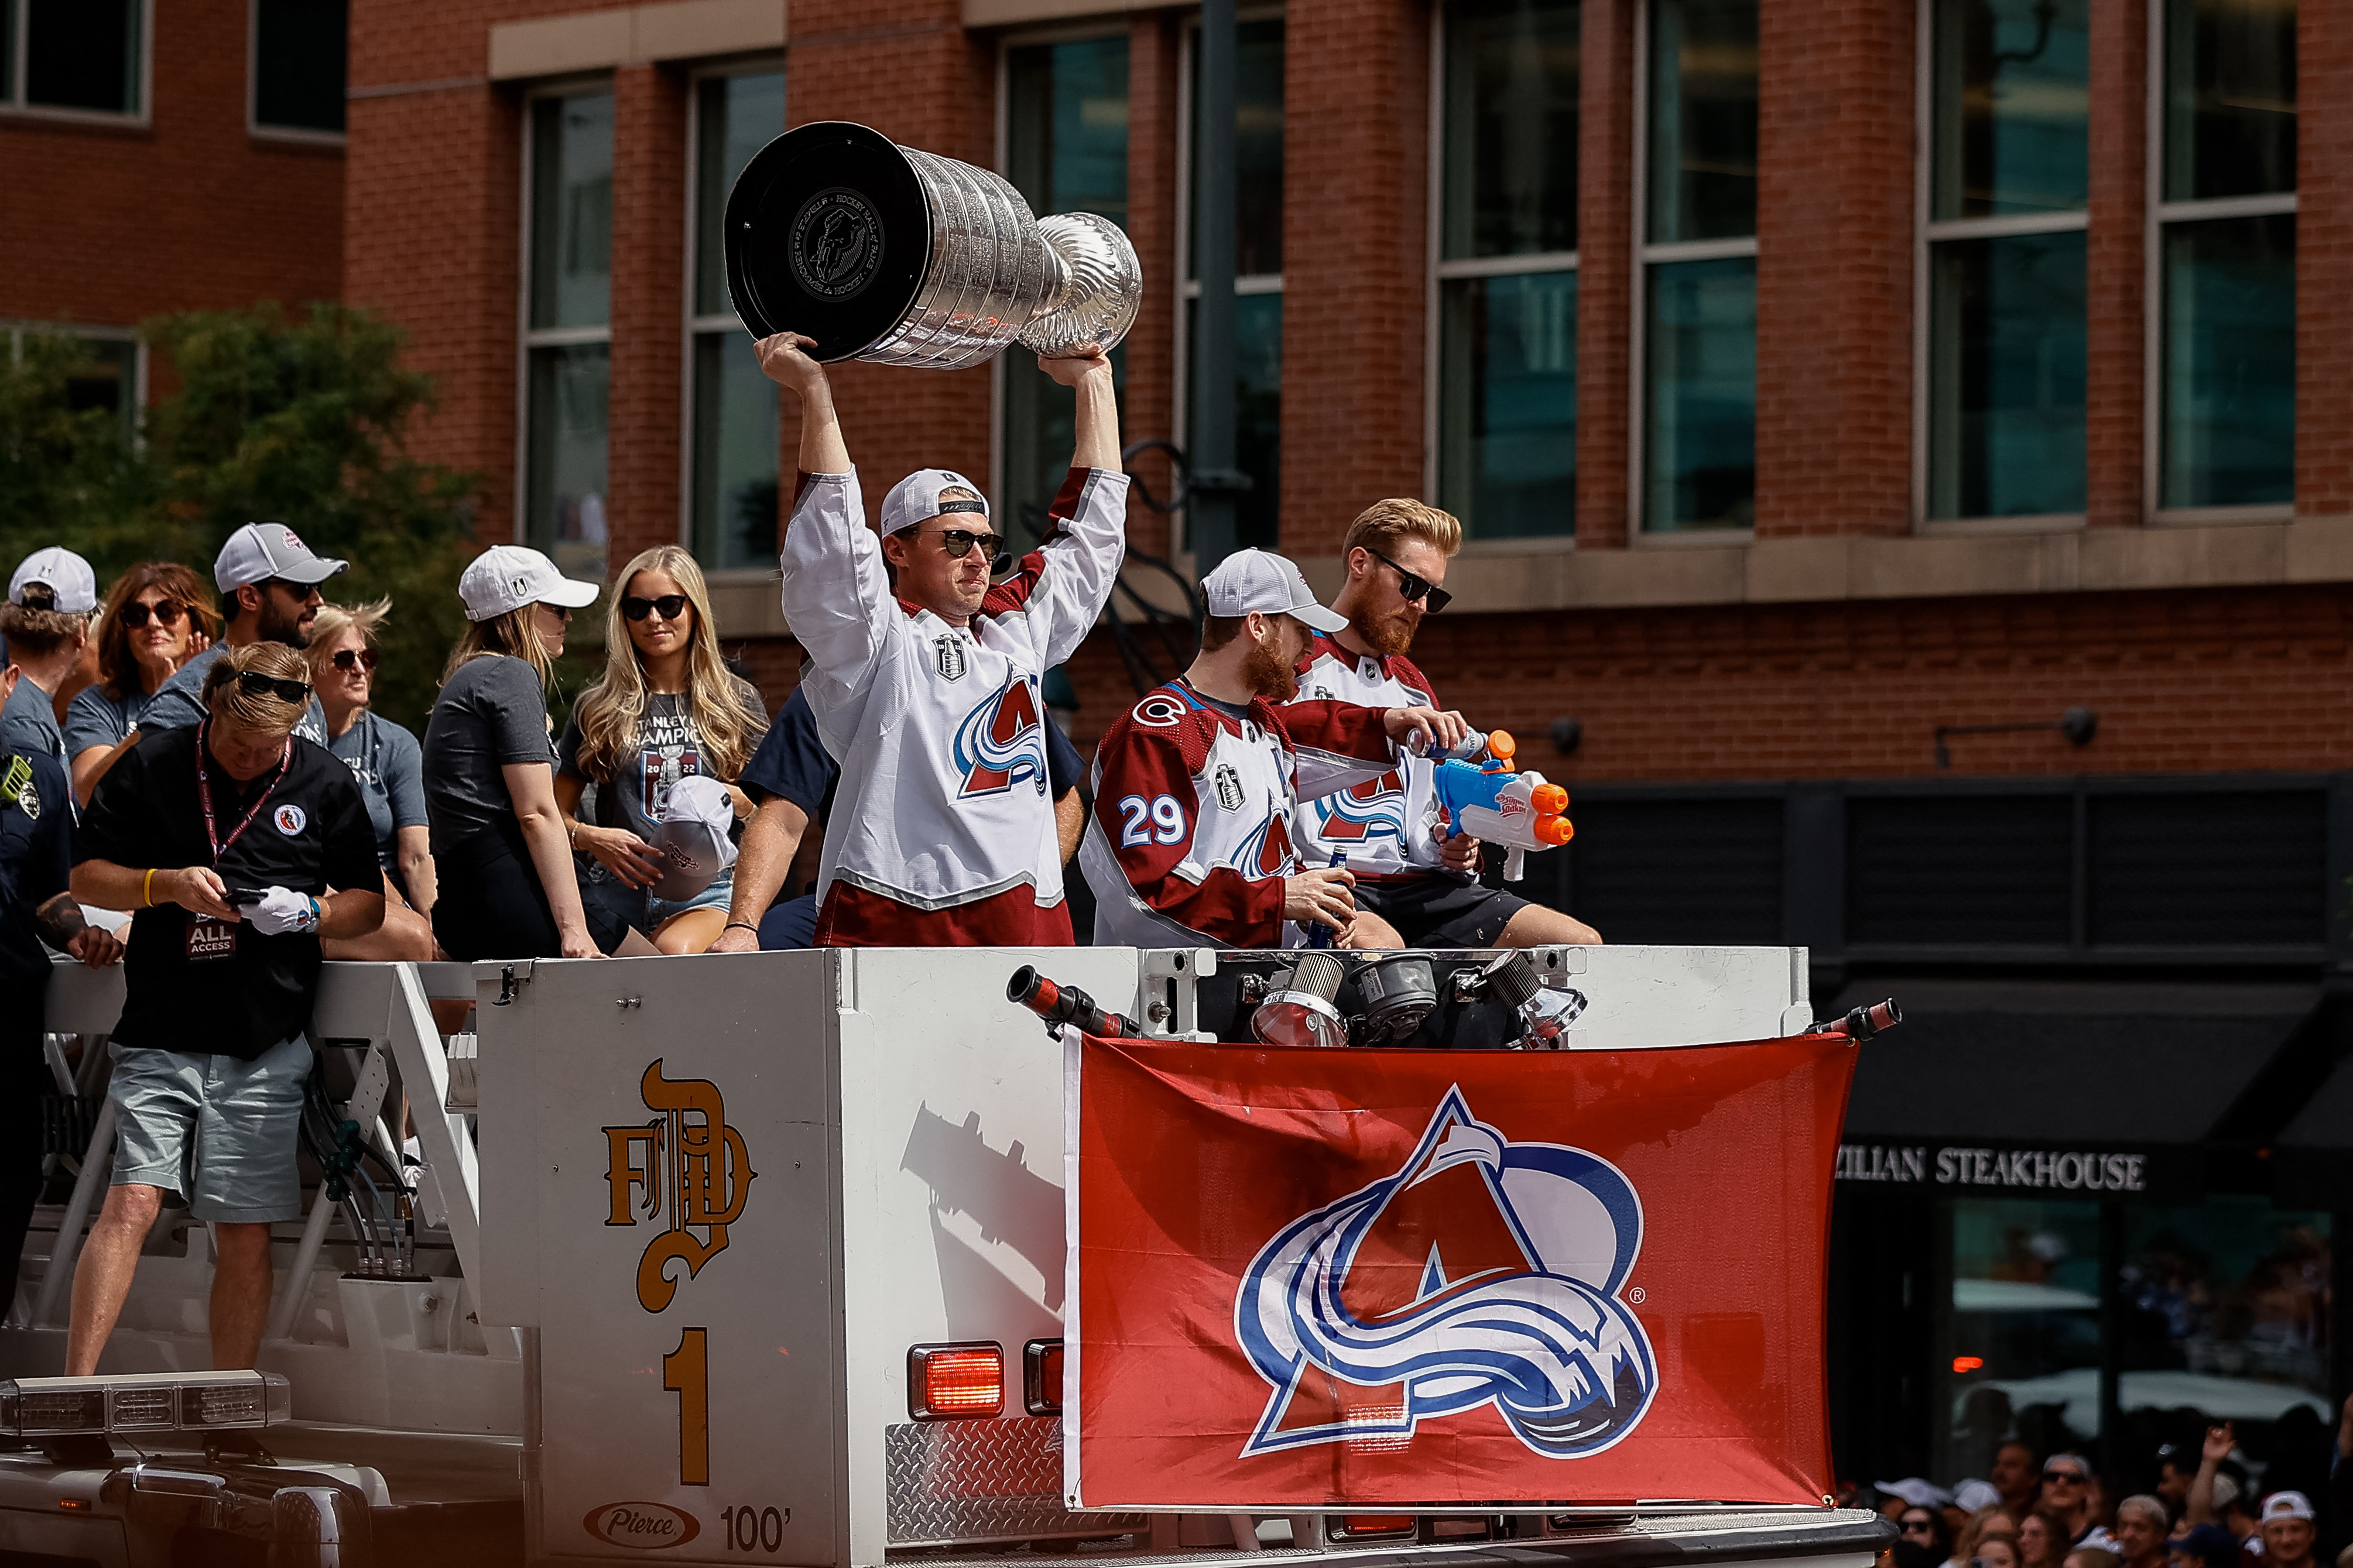 Jun 30, 2022; Denver, Colorado, USA; Colorado Avalanche player Erik Johnson lifts the Stanley Cup as teammate Nathan MacKinnon watches Gabriel Landsekog fills a squirt gun with water during the Stanley Cup celebration parade as it makes its way through downtown Denver towards Civic Center Park. Mandatory Credit: Isaiah J. Downing-USA TODAY Sports